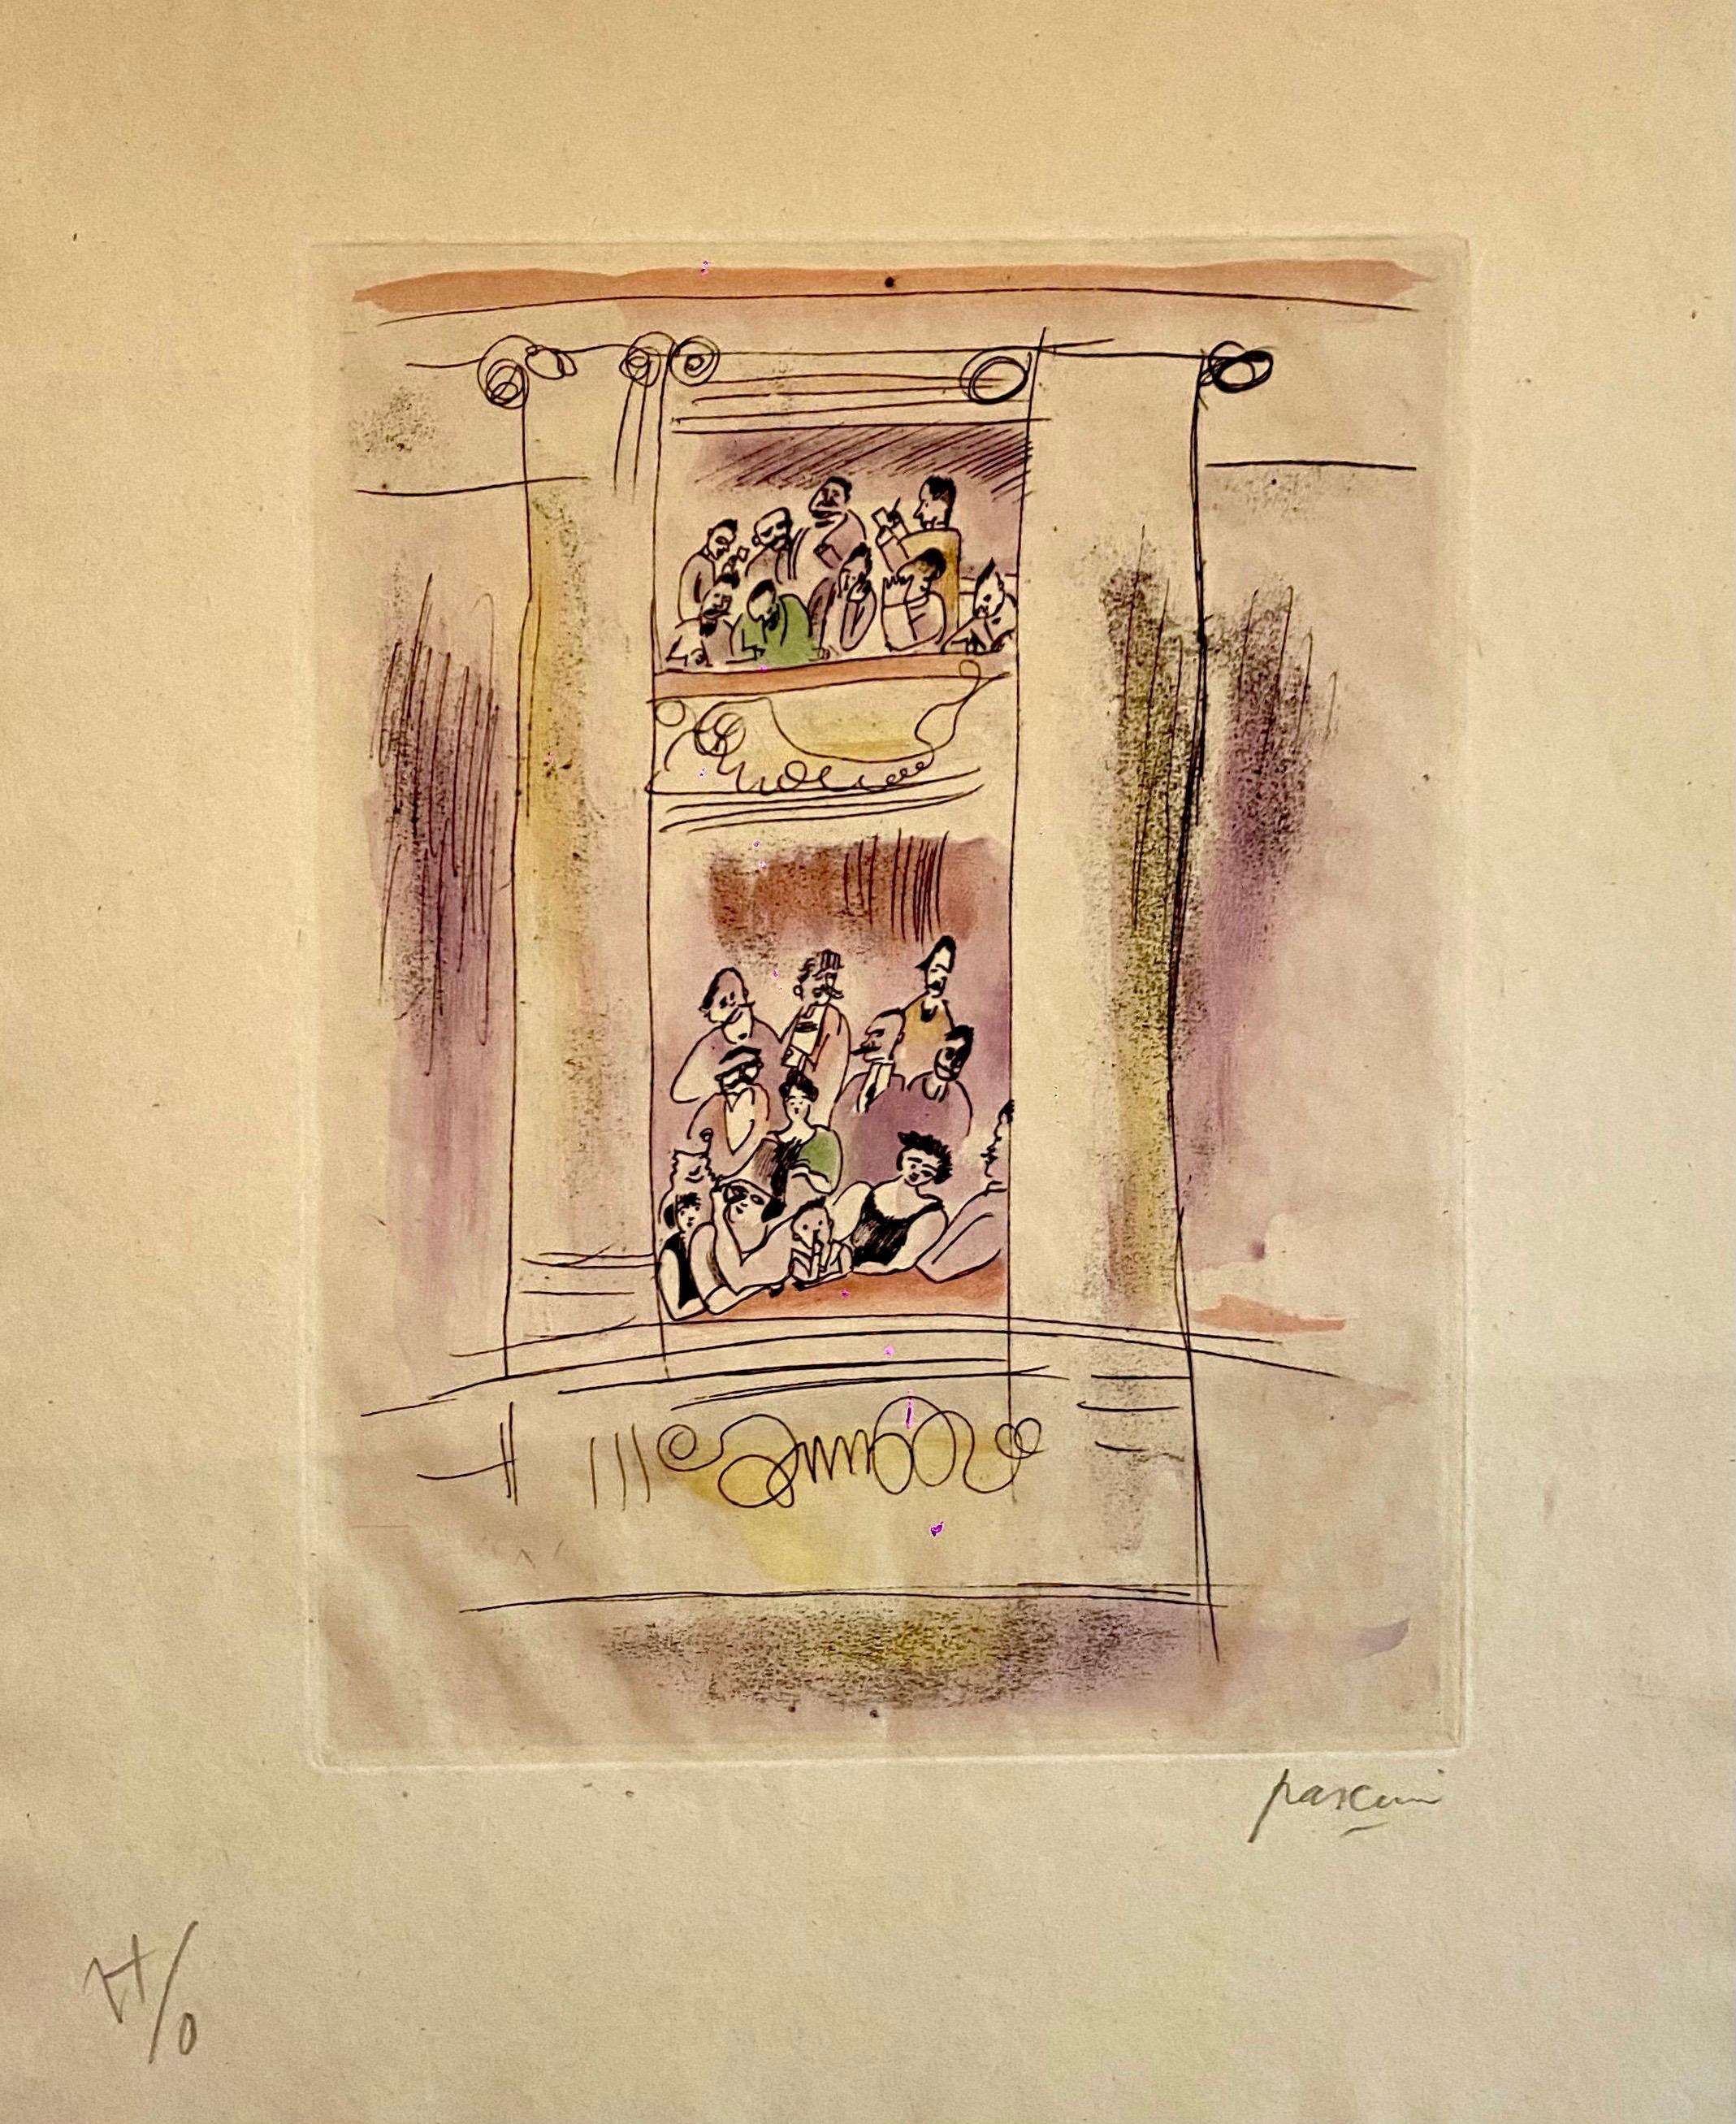 
Genre: German Expressionist
Subject: Figures in the balcony of a theatre
Medium: etching, watercolor paint
Surface: Paper
This is hand signed lower right. there does not seem to be an edition size.
sheet measures 13 X 10. plate size about 9 x